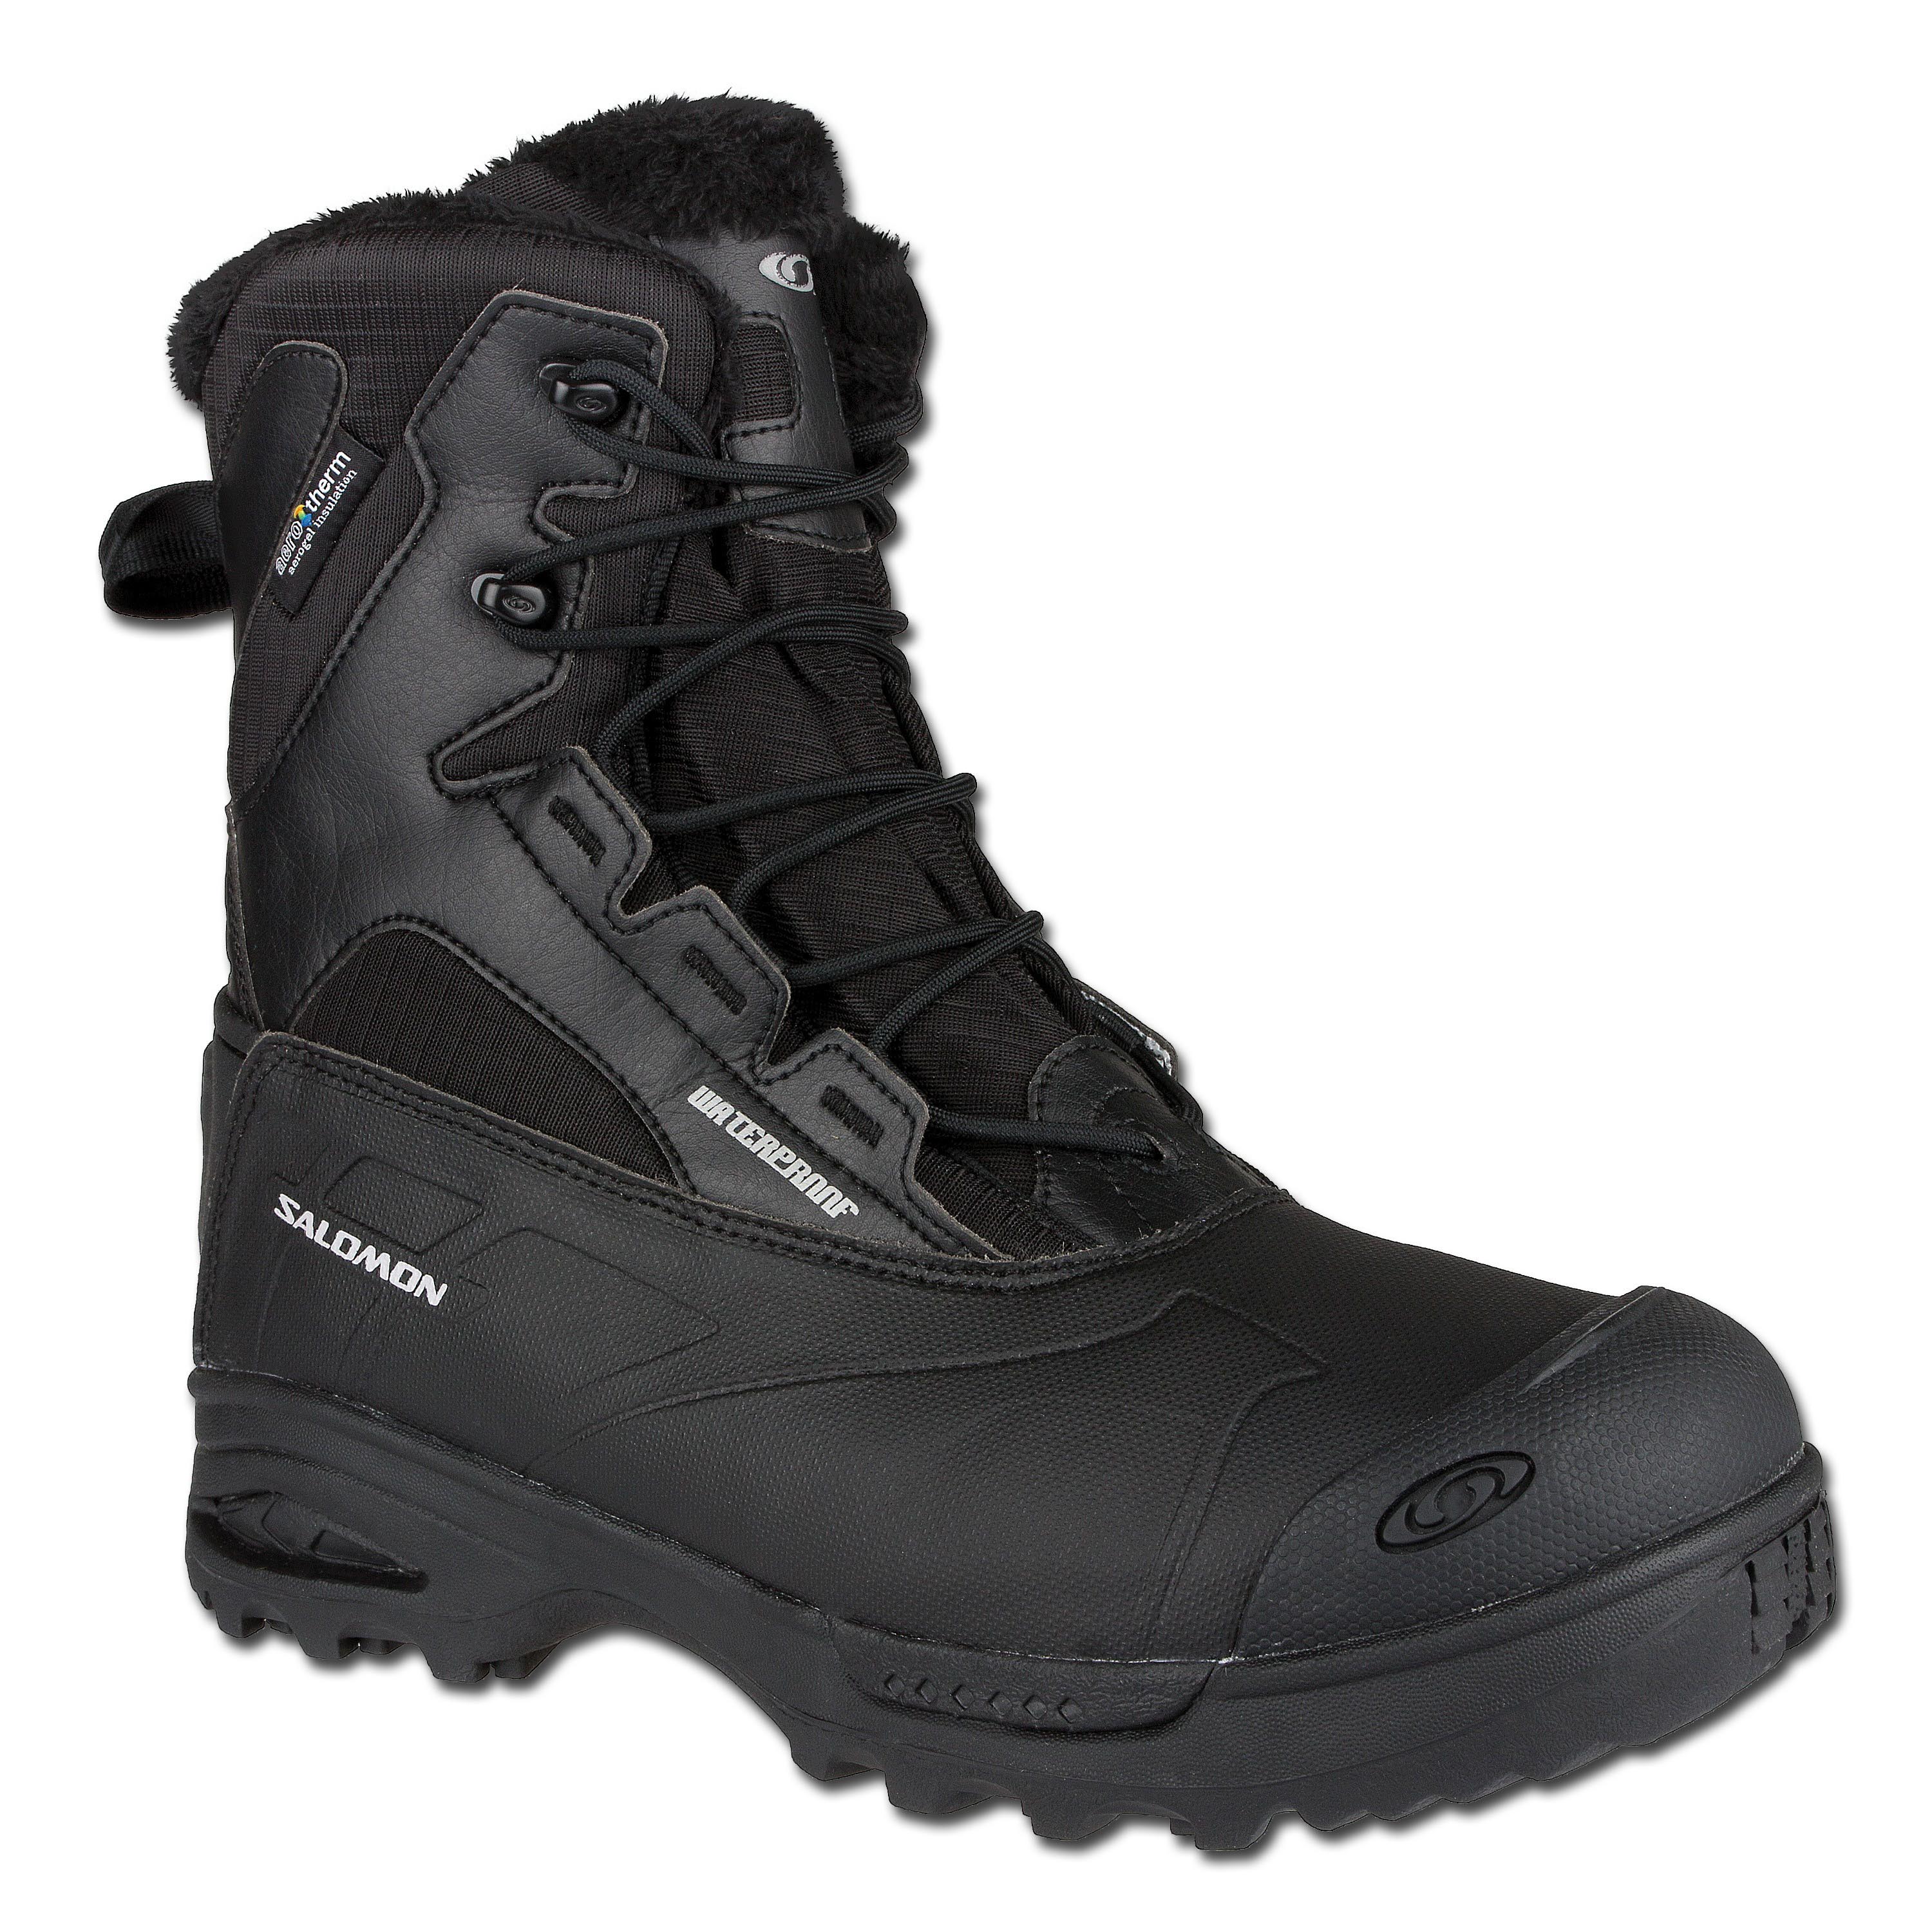 Boots Salomon Toundra MID WP | Winter Boots Salomon WP | Other Boots | Boots Footwear | Clothing